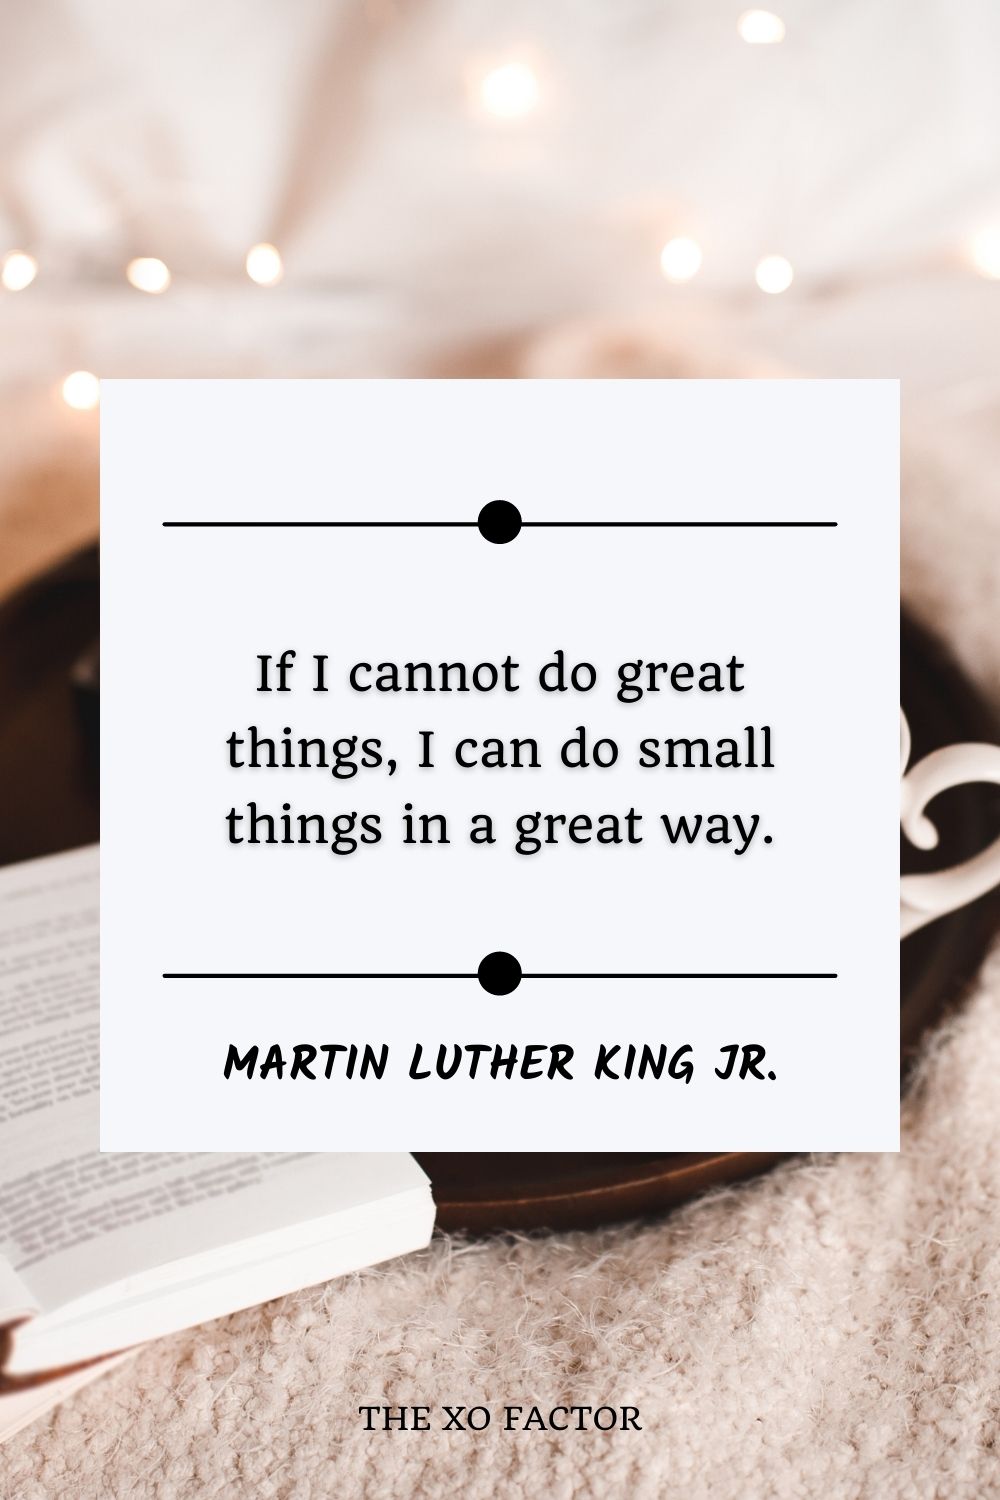 If I cannot do great things, I can do small things in a great way.” – Martin Luther King Jr.